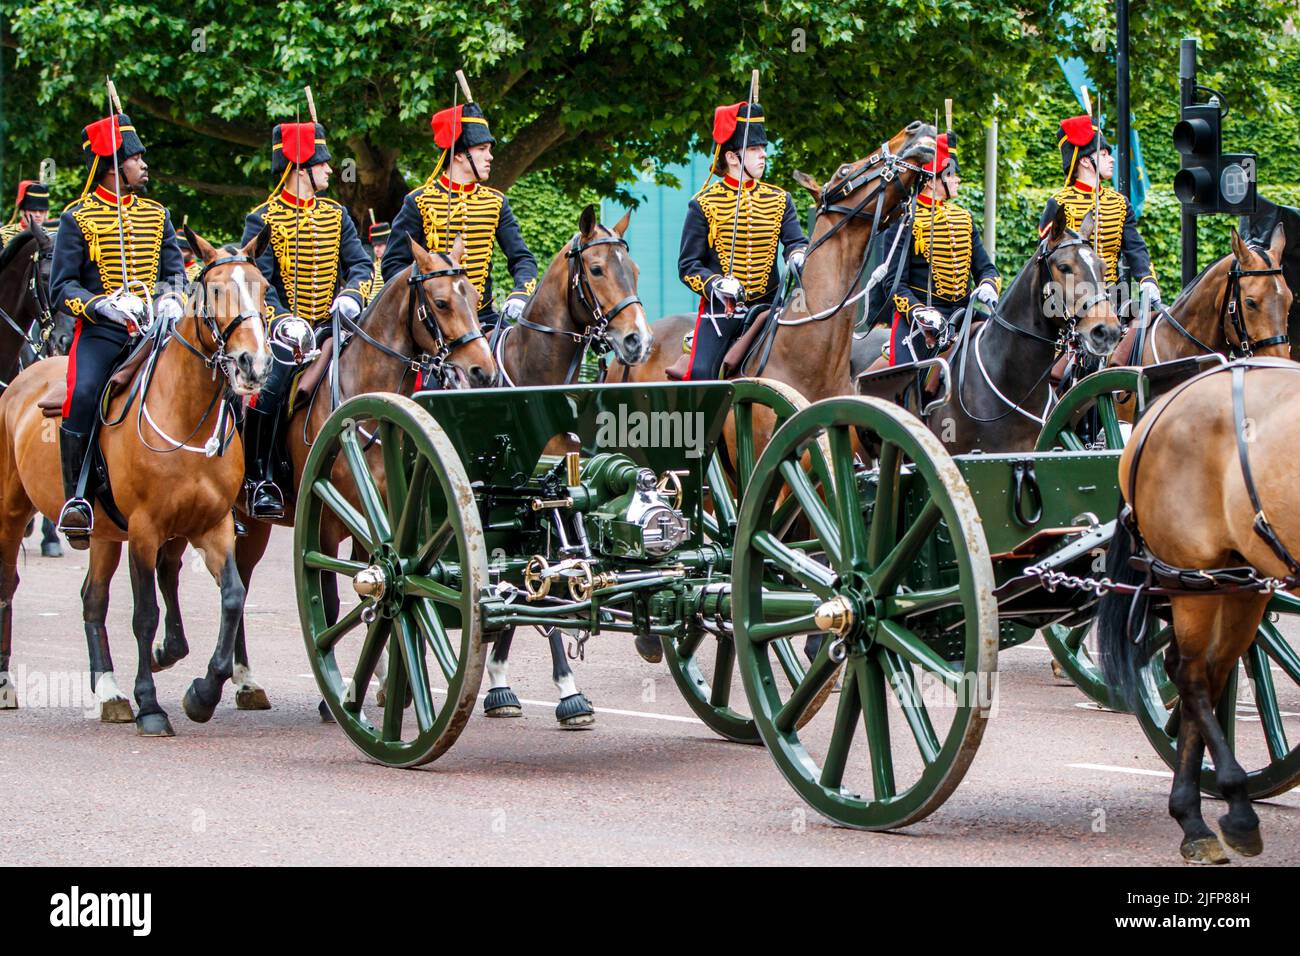 The King’s Truppe, Royal Horse Artillery at Trooping the Color, Colonel’s Review in the Mall, London, England, Großbritannien am Samstag, den 28. Mai 202 Stockfoto